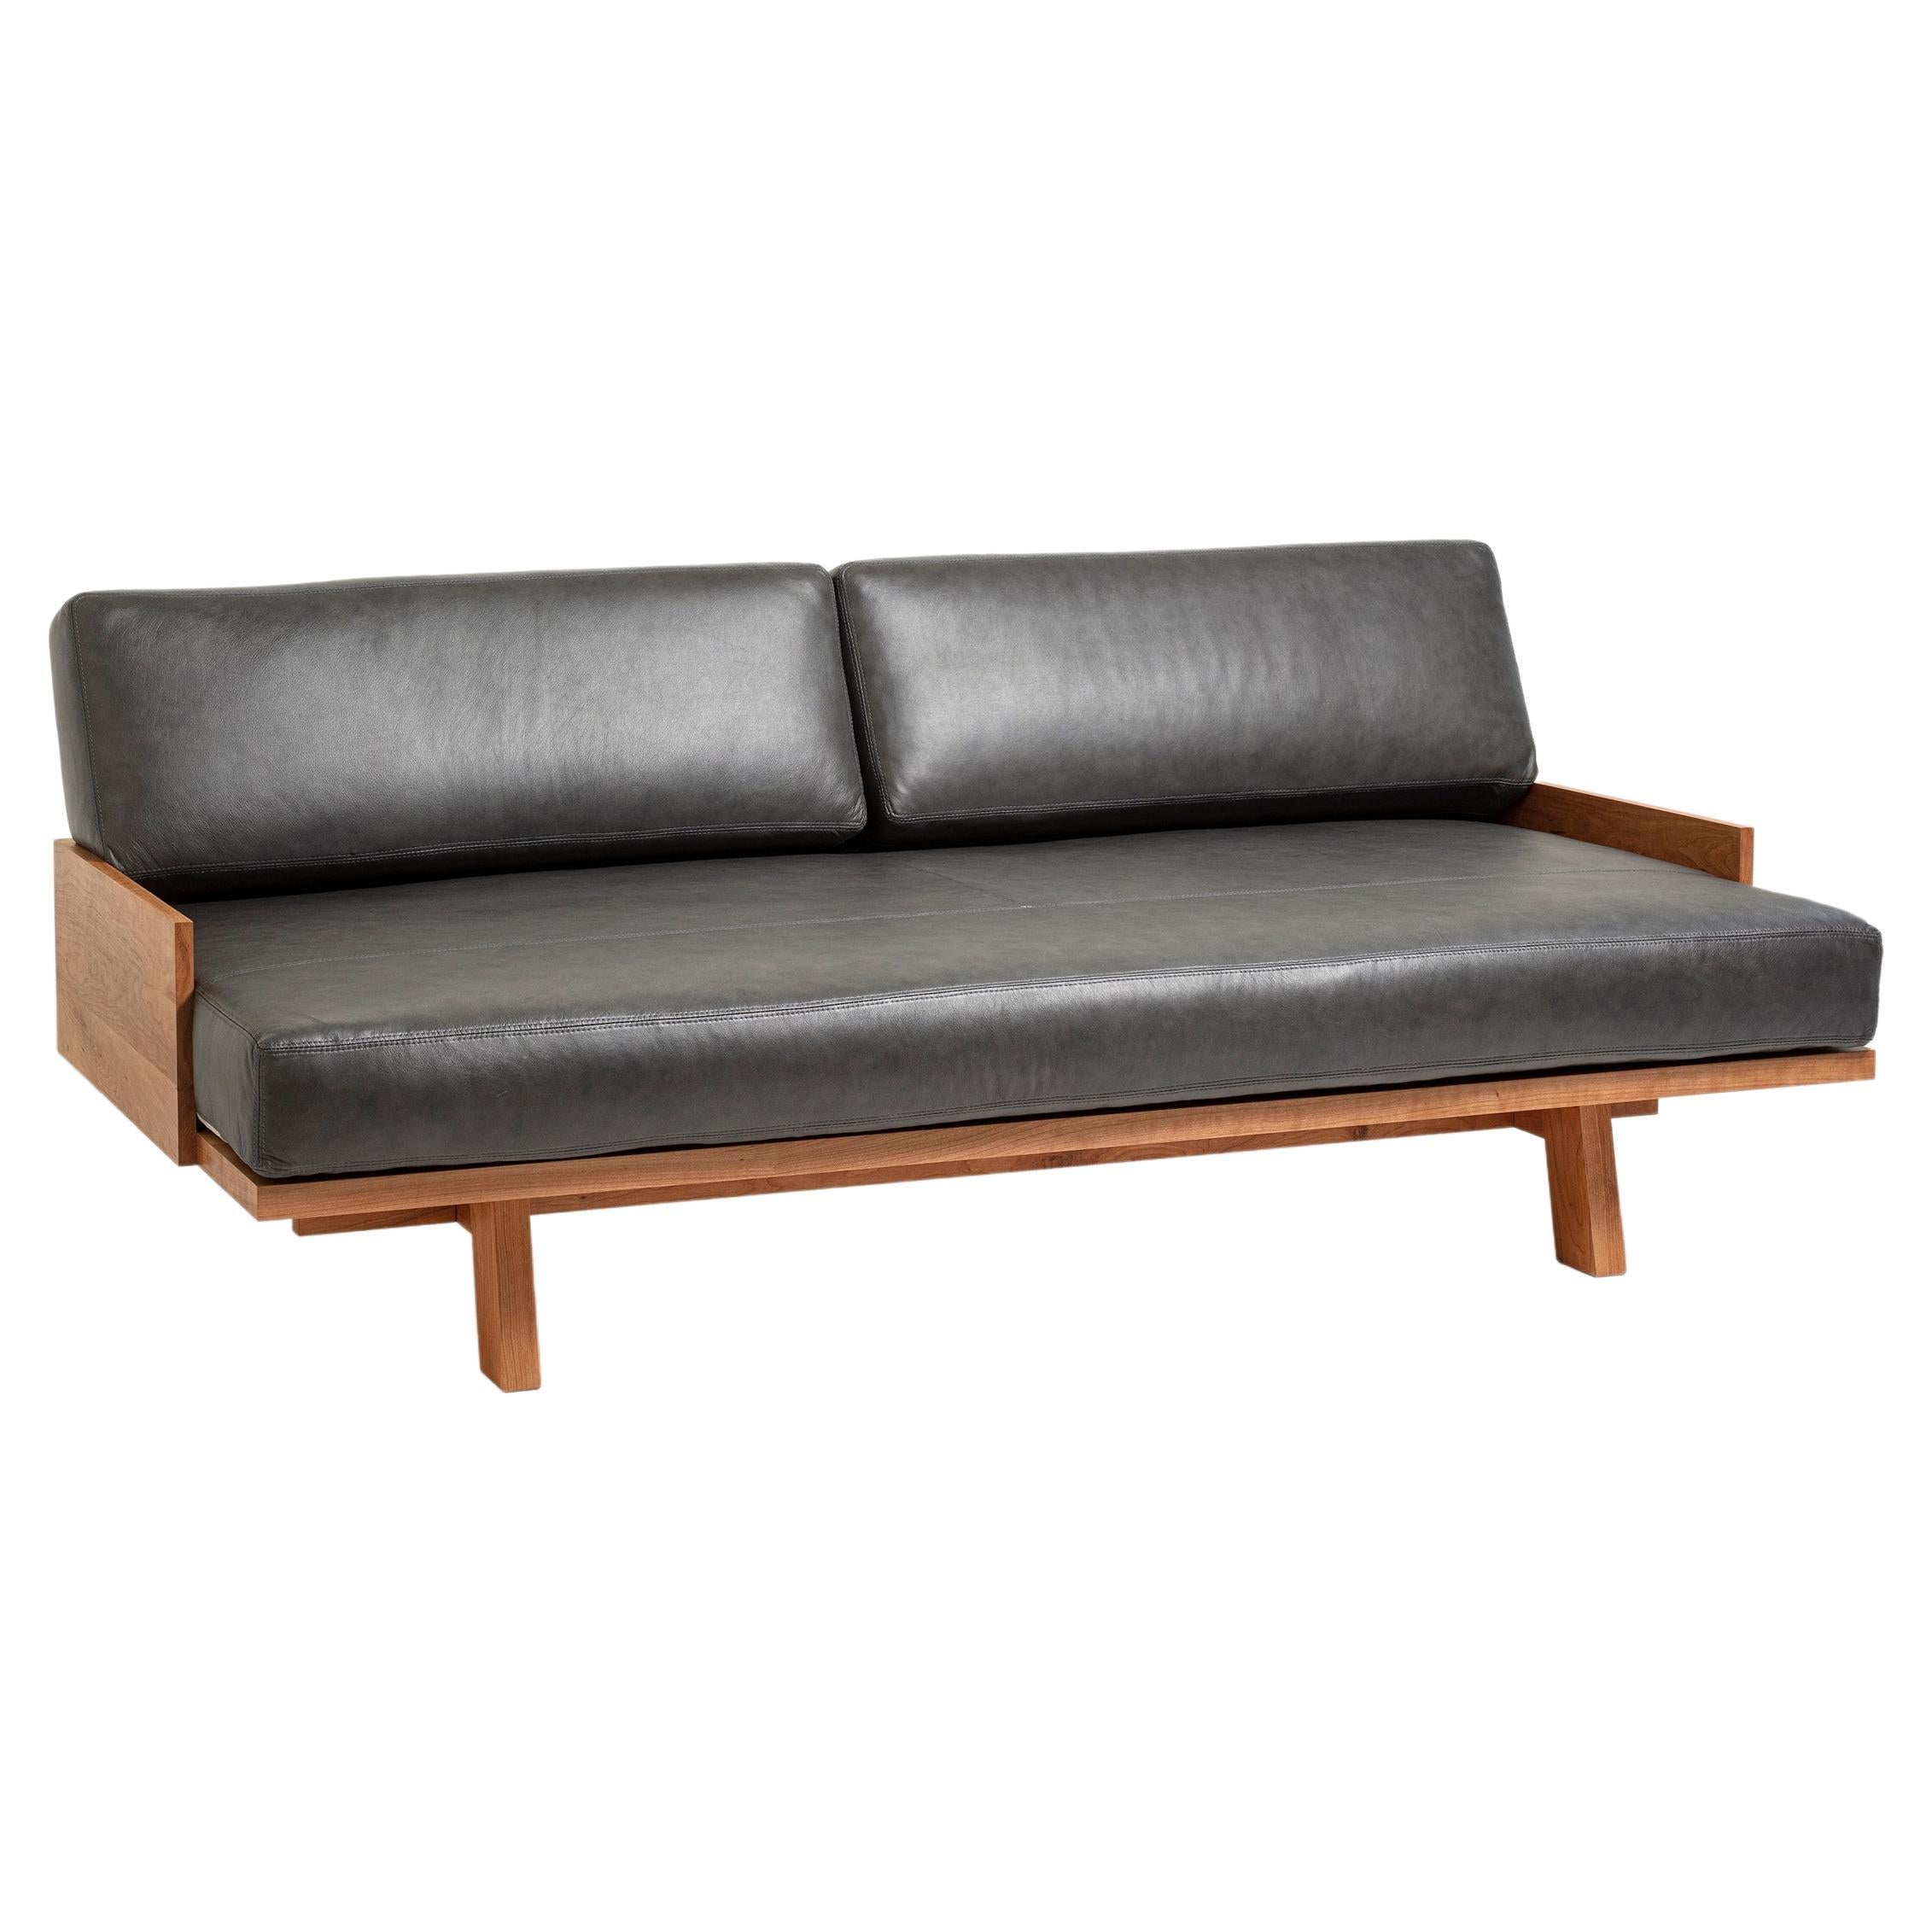 Entea, Sofa/Daybed Leather Cushions and Wooden Base by CMX